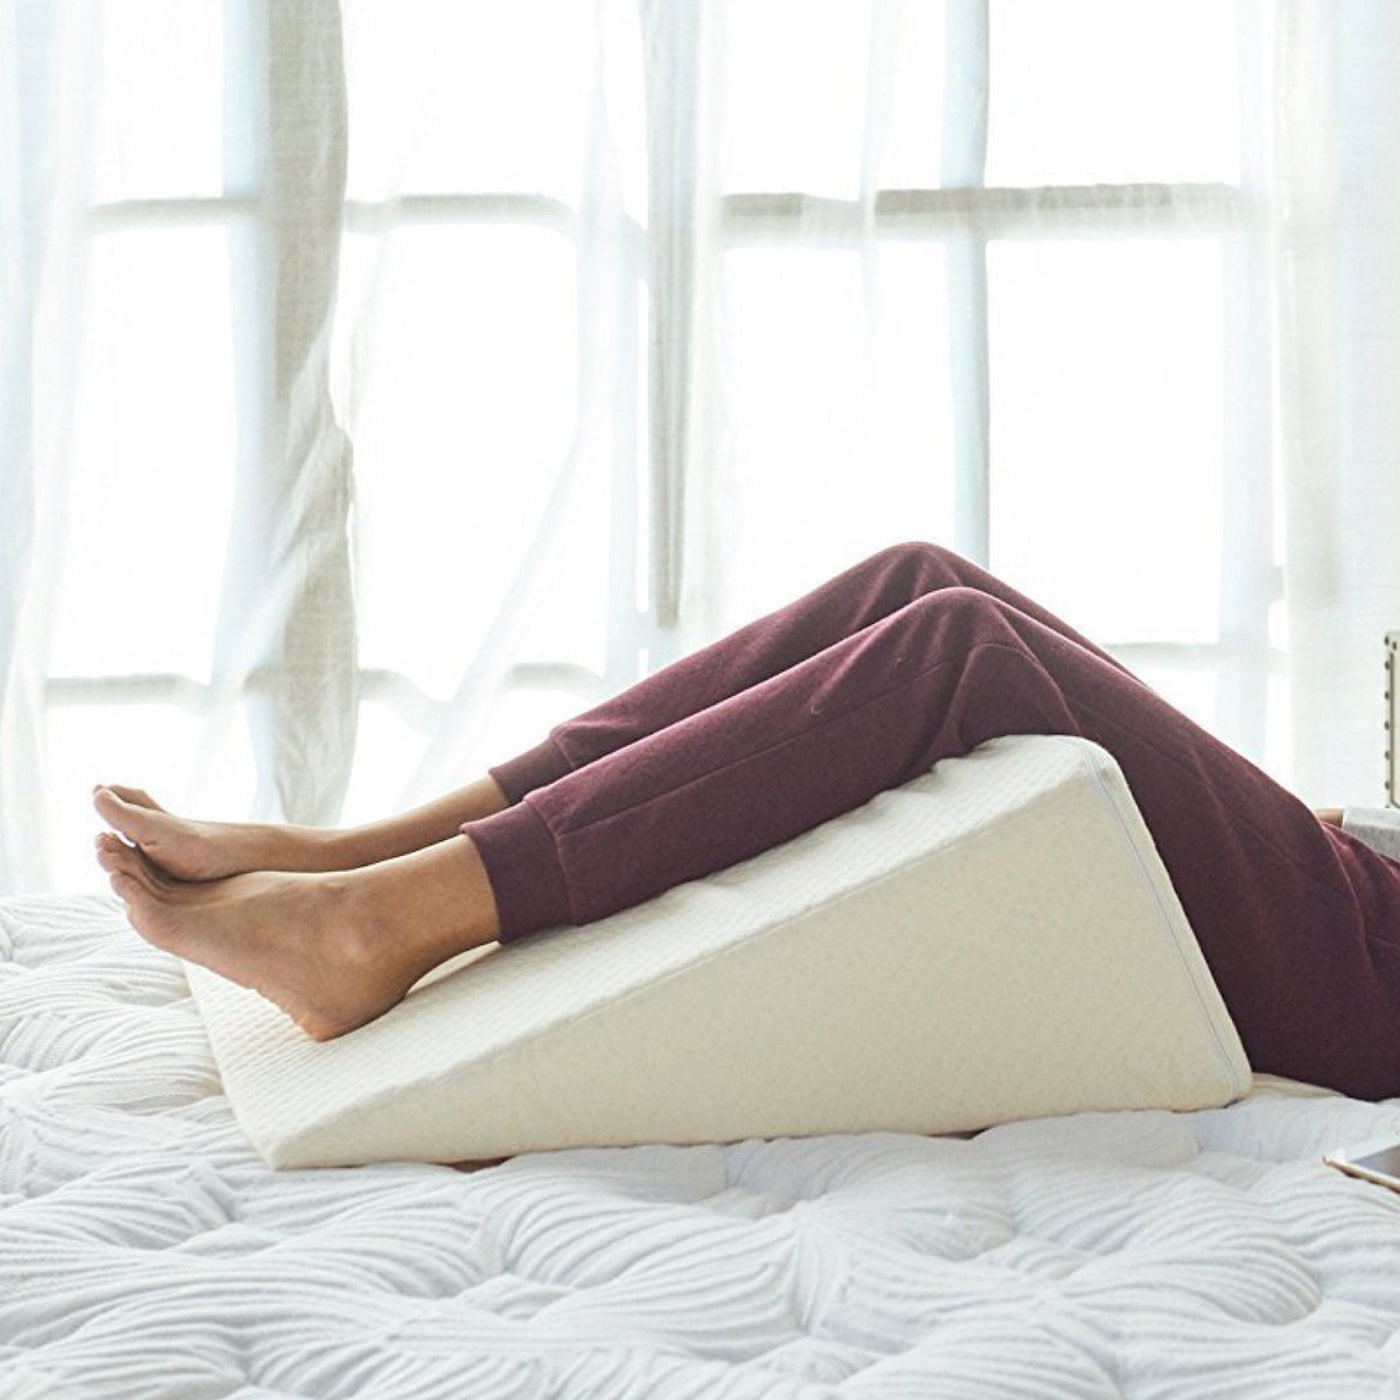 Dosaze™ Therapeutic Cooling Wedge Pillow